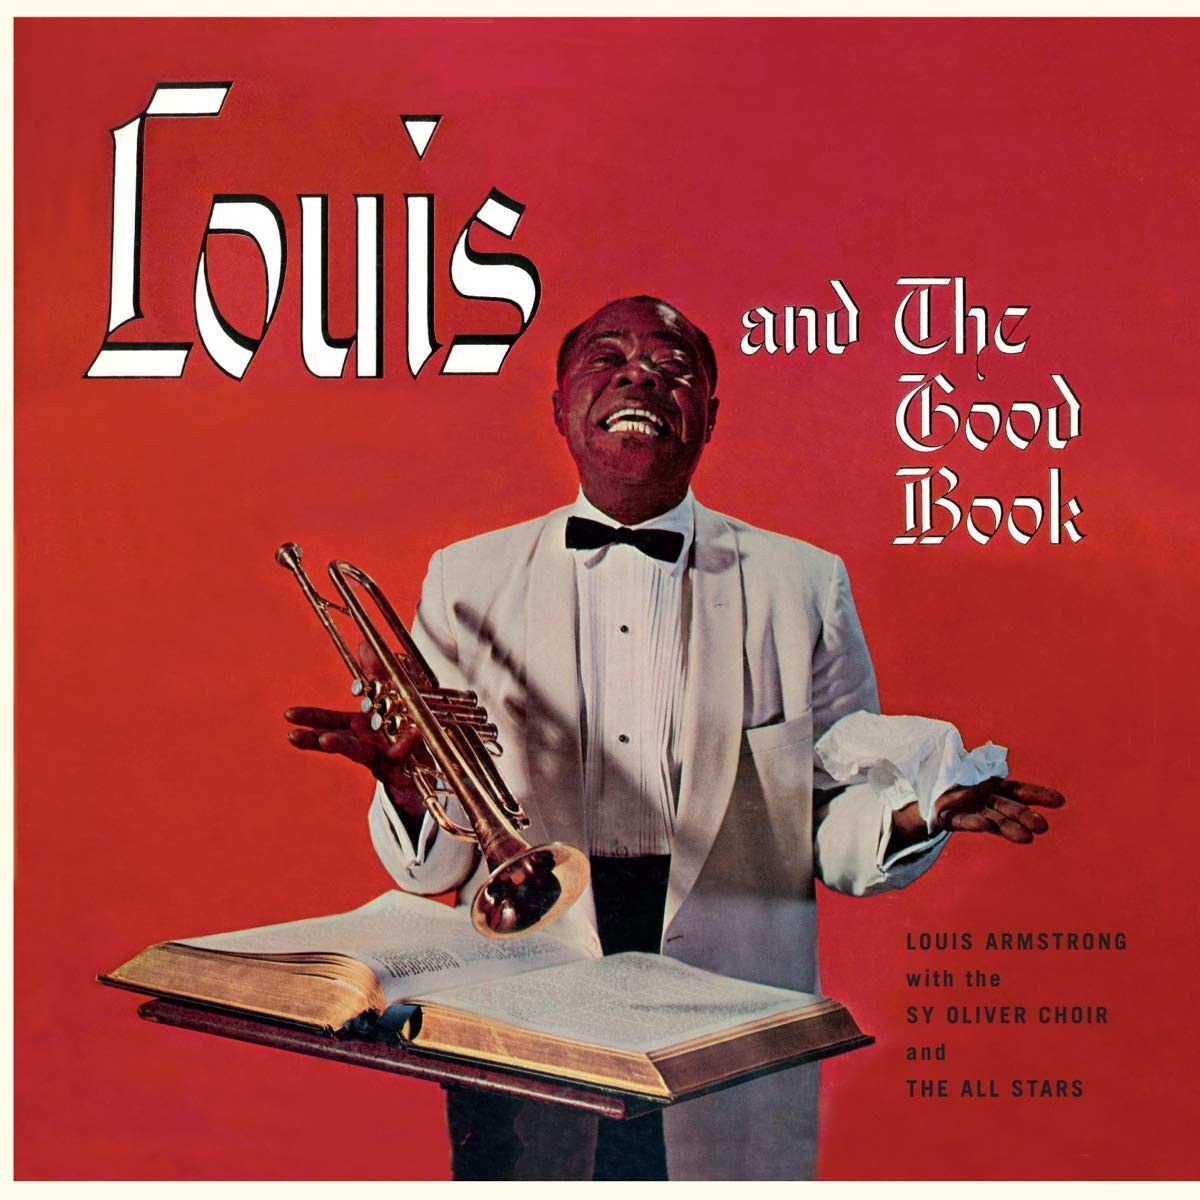 Louis and the good book colored vinyl